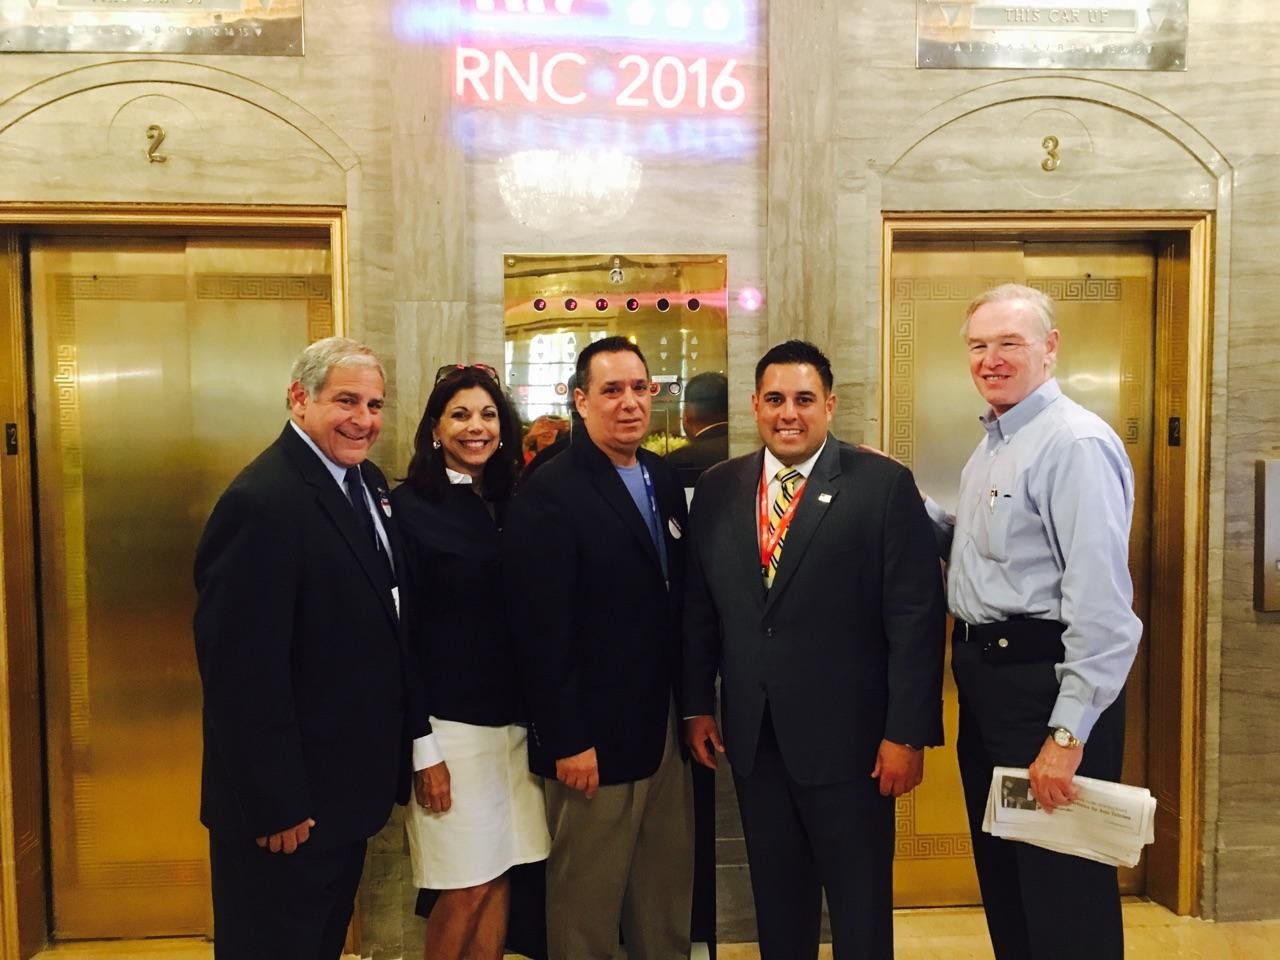 Valley Stream officials, from left, John and Barbara DeGrace and John Tufarelli attended the 2016 Republican National Convention with Hempstead Town Councilman Anthony D’Esposito and Nassau County Legislator Howard Kopel, among others.